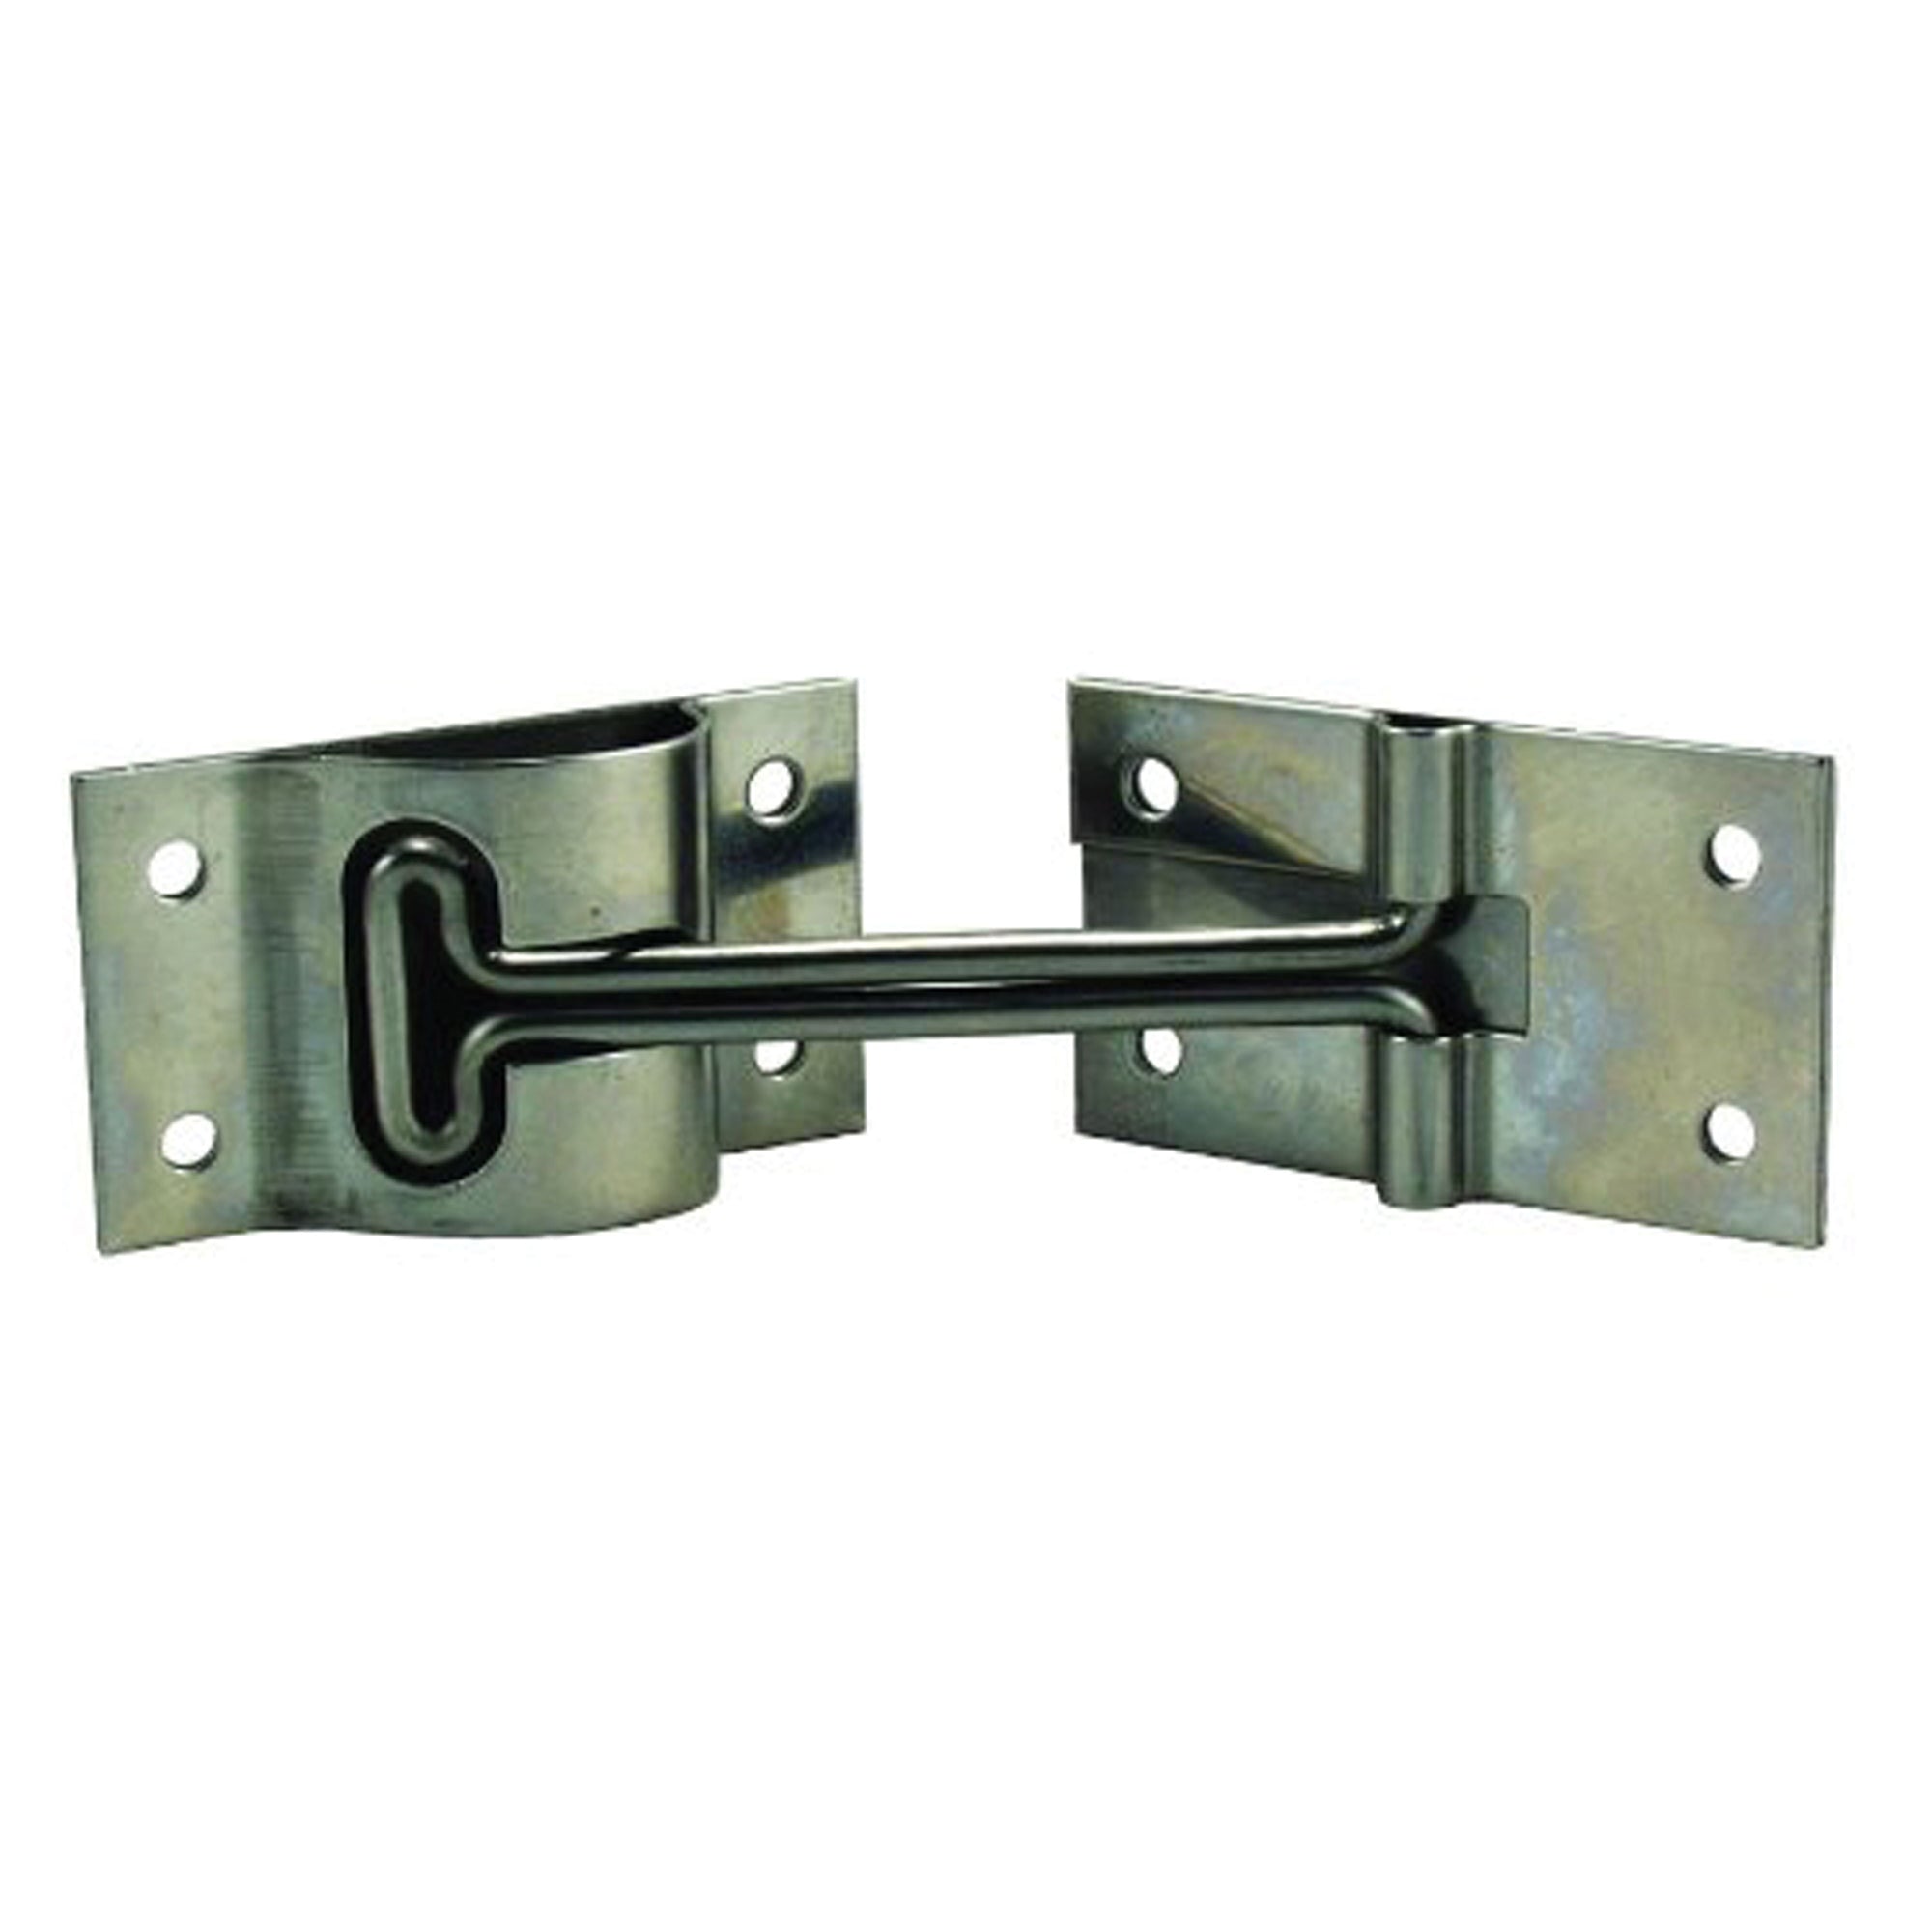 JR Products 10525 Stainless Steel T-Style Door Holder - 6"